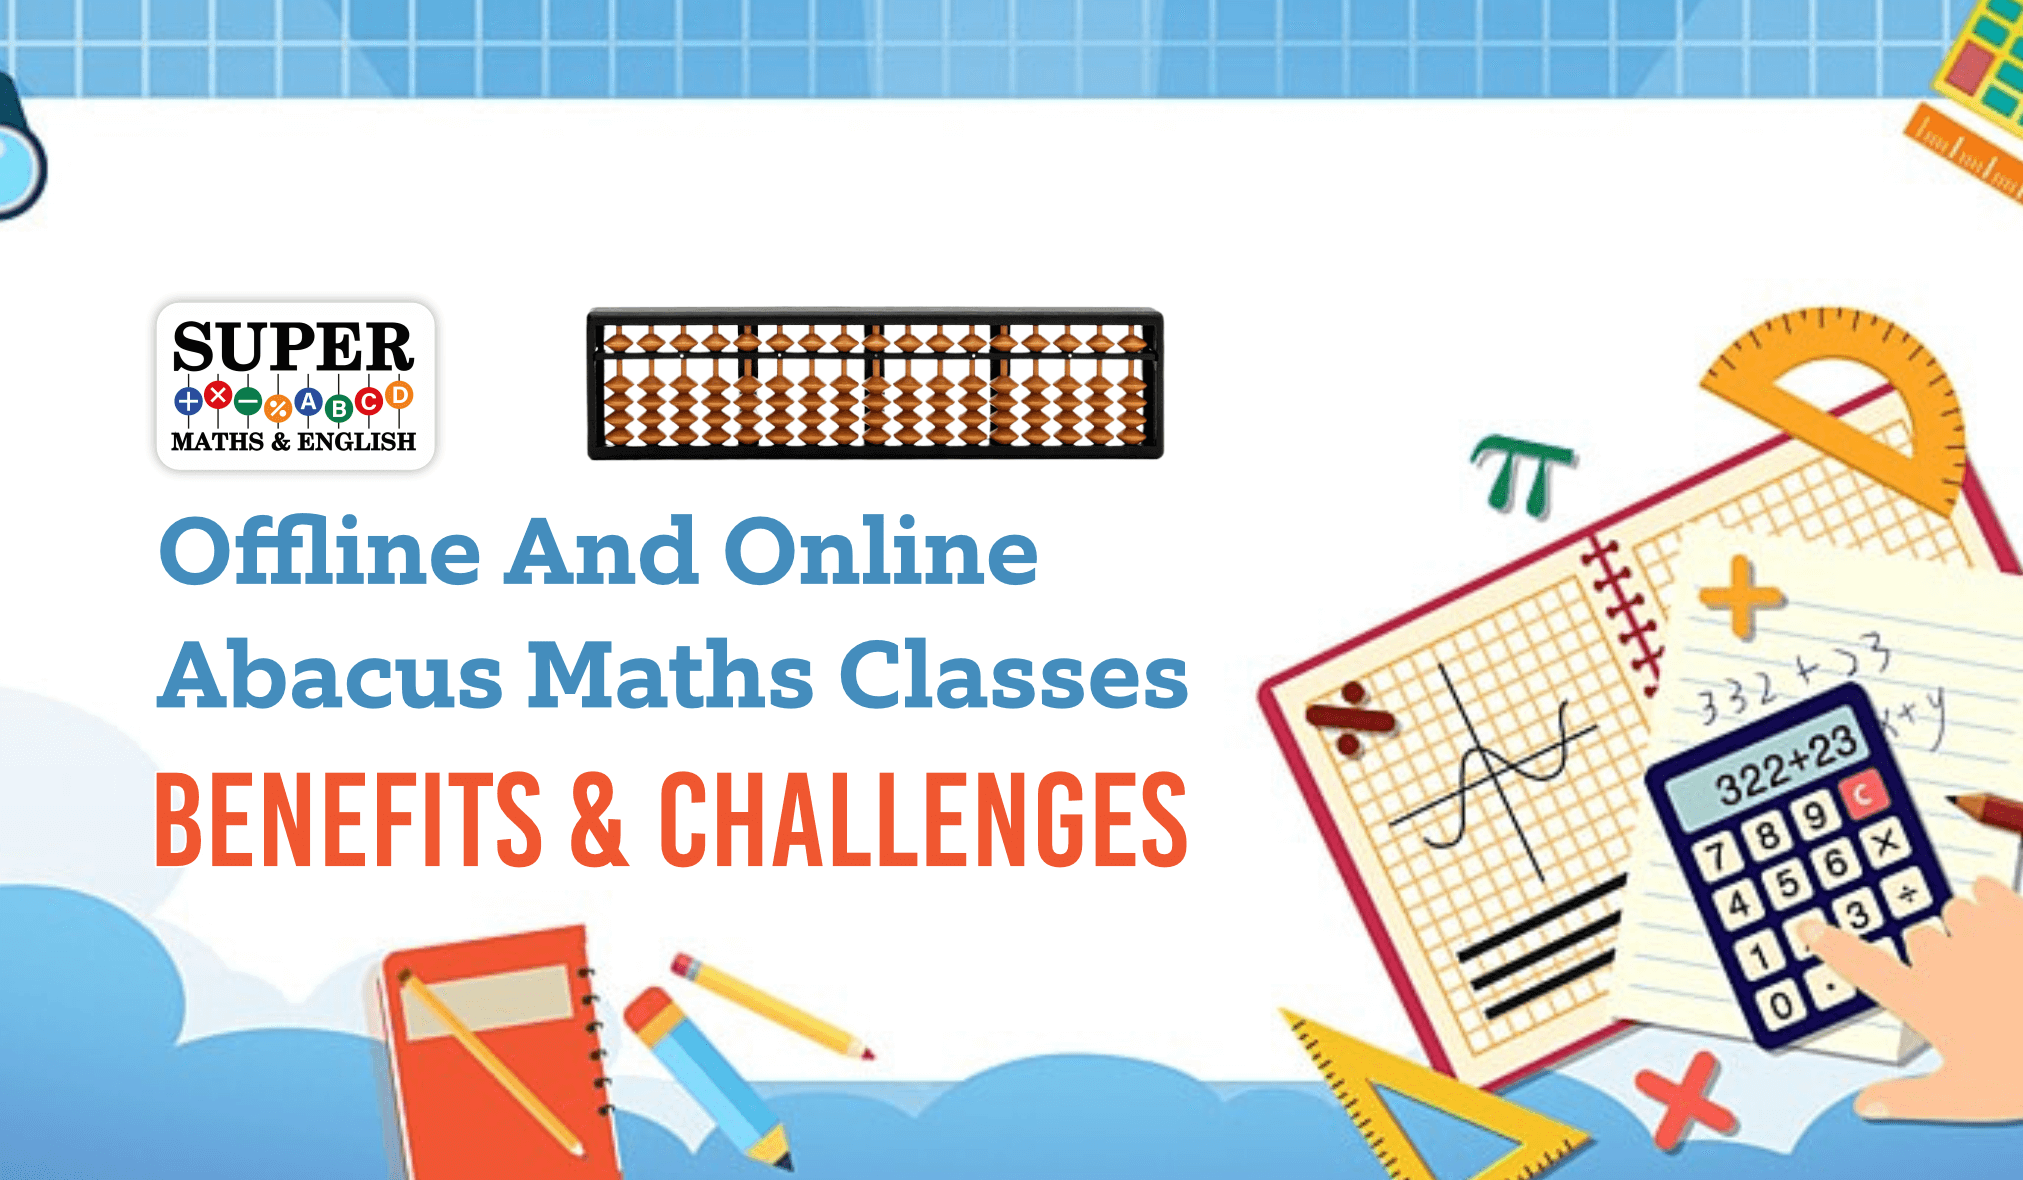 Offline And Online Abacus Maths | Supermaths